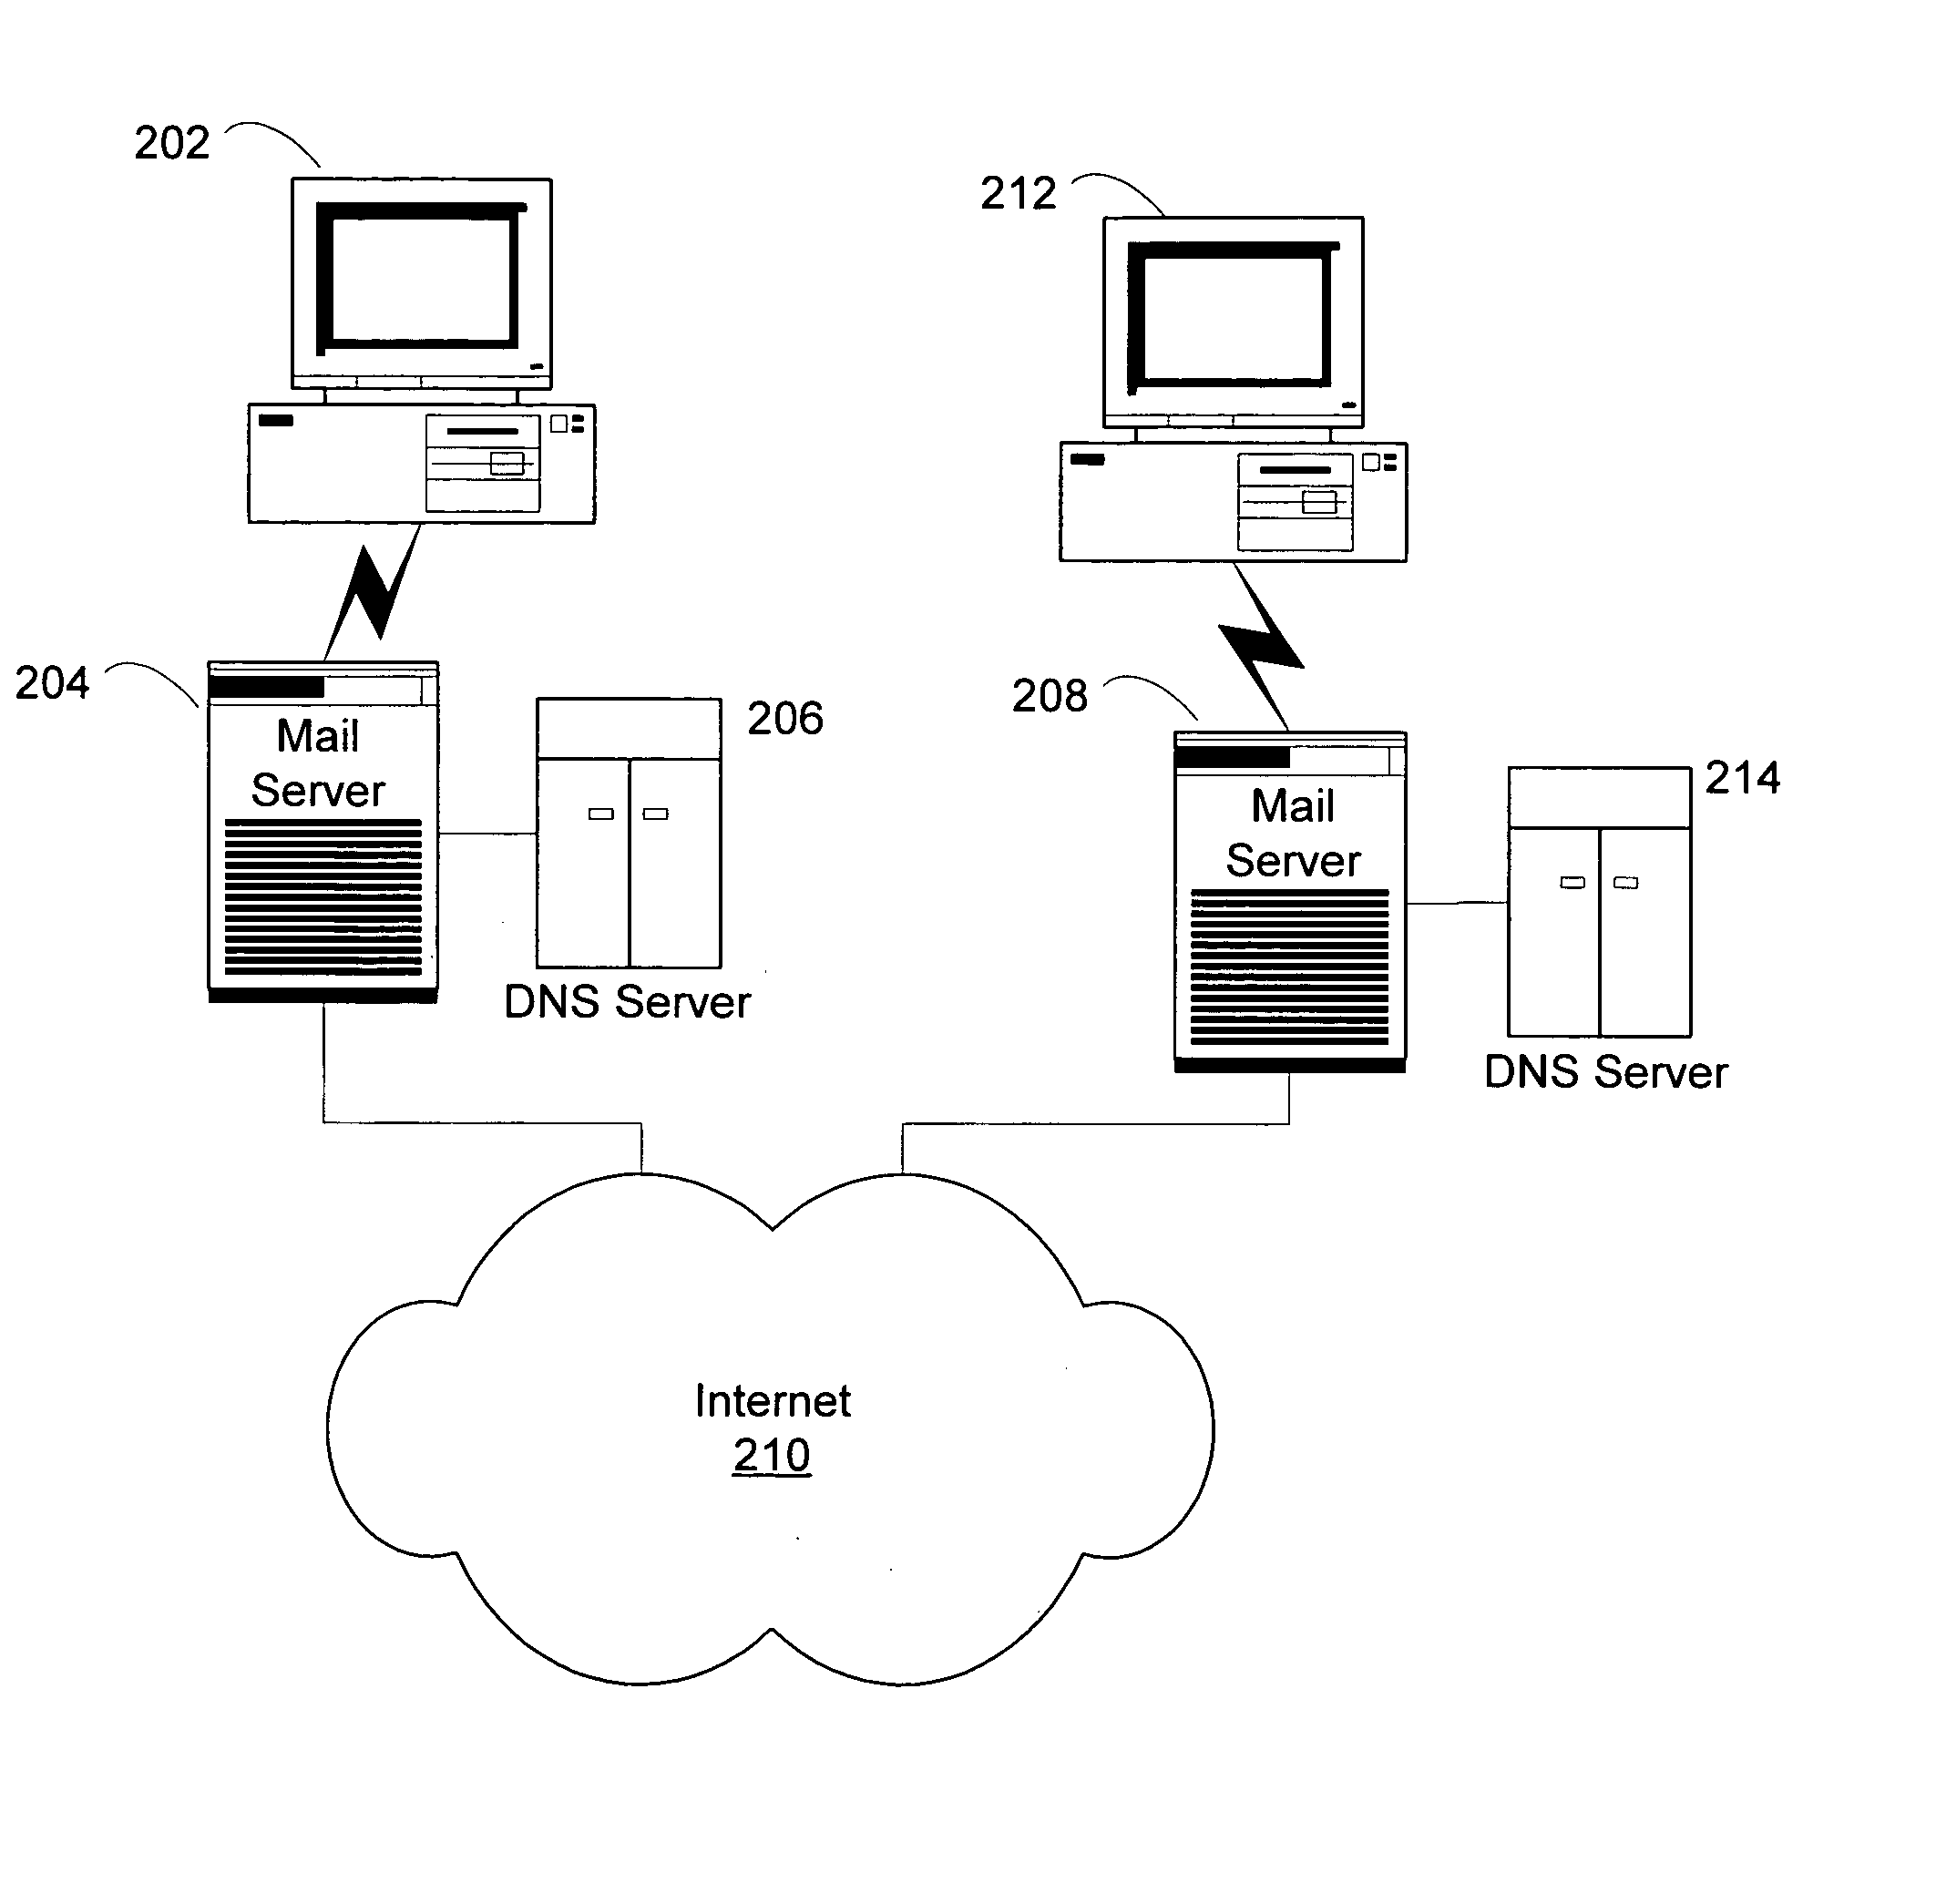 Authenticated exchange of public information using electronic mail